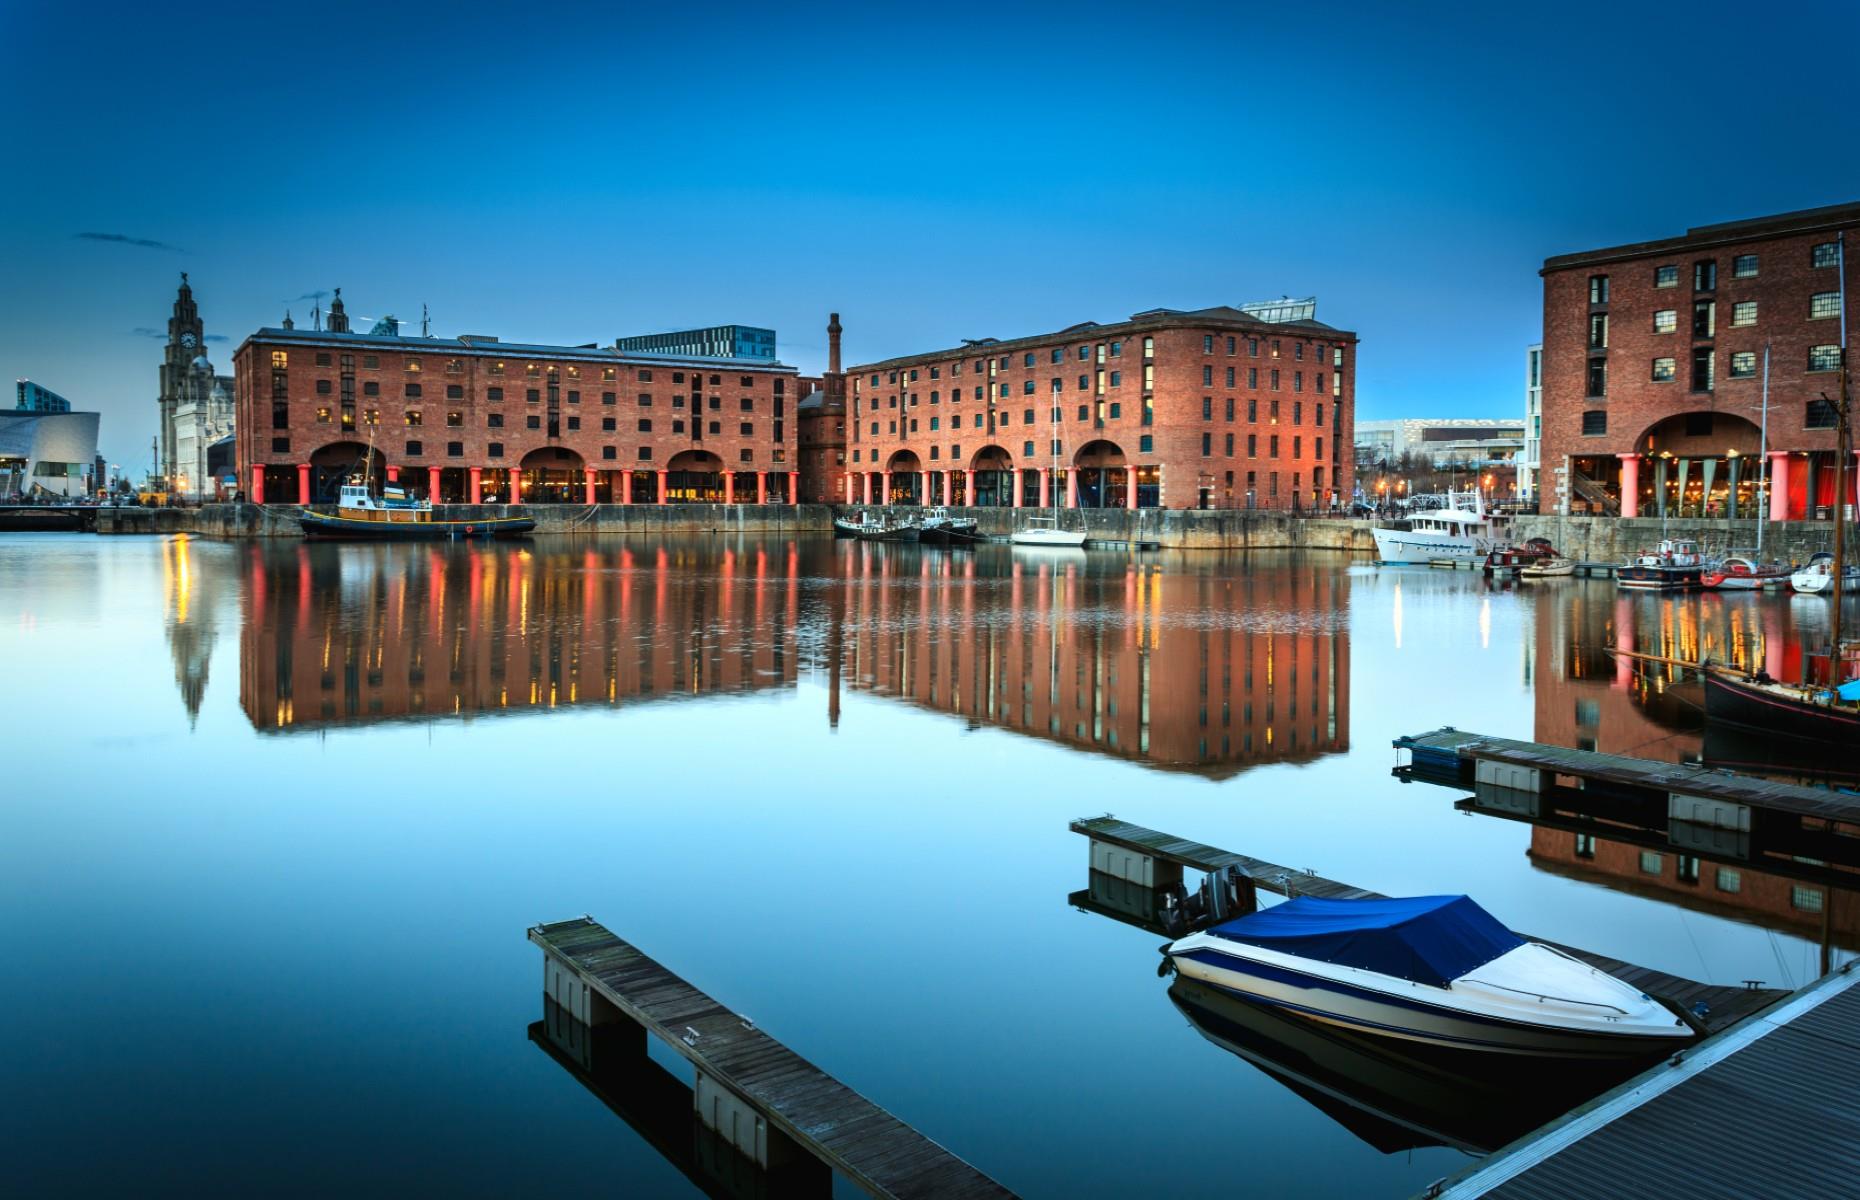 <p>Situated within <a href="https://www.loveexploring.com/news/72367/a-dynamic-northern-city-what-to-do-in-liverpool">Liverpool</a>’s world-renowned waterfront, the breathtakingly beautiful Albert Dock is home to the largest collection of Grade I-listed buildings in the UK. Established in 1846, the port became one of the world’s largest trading centres and played an important role in the transatlantic slave trade during the 18th century. Following its closure in 1972, the dock’s old warehouses have become a vibrant cultural attraction, featuring the Tate Liverpool, The Merseyside Maritime Museum and the International Slavery Museum.</p>